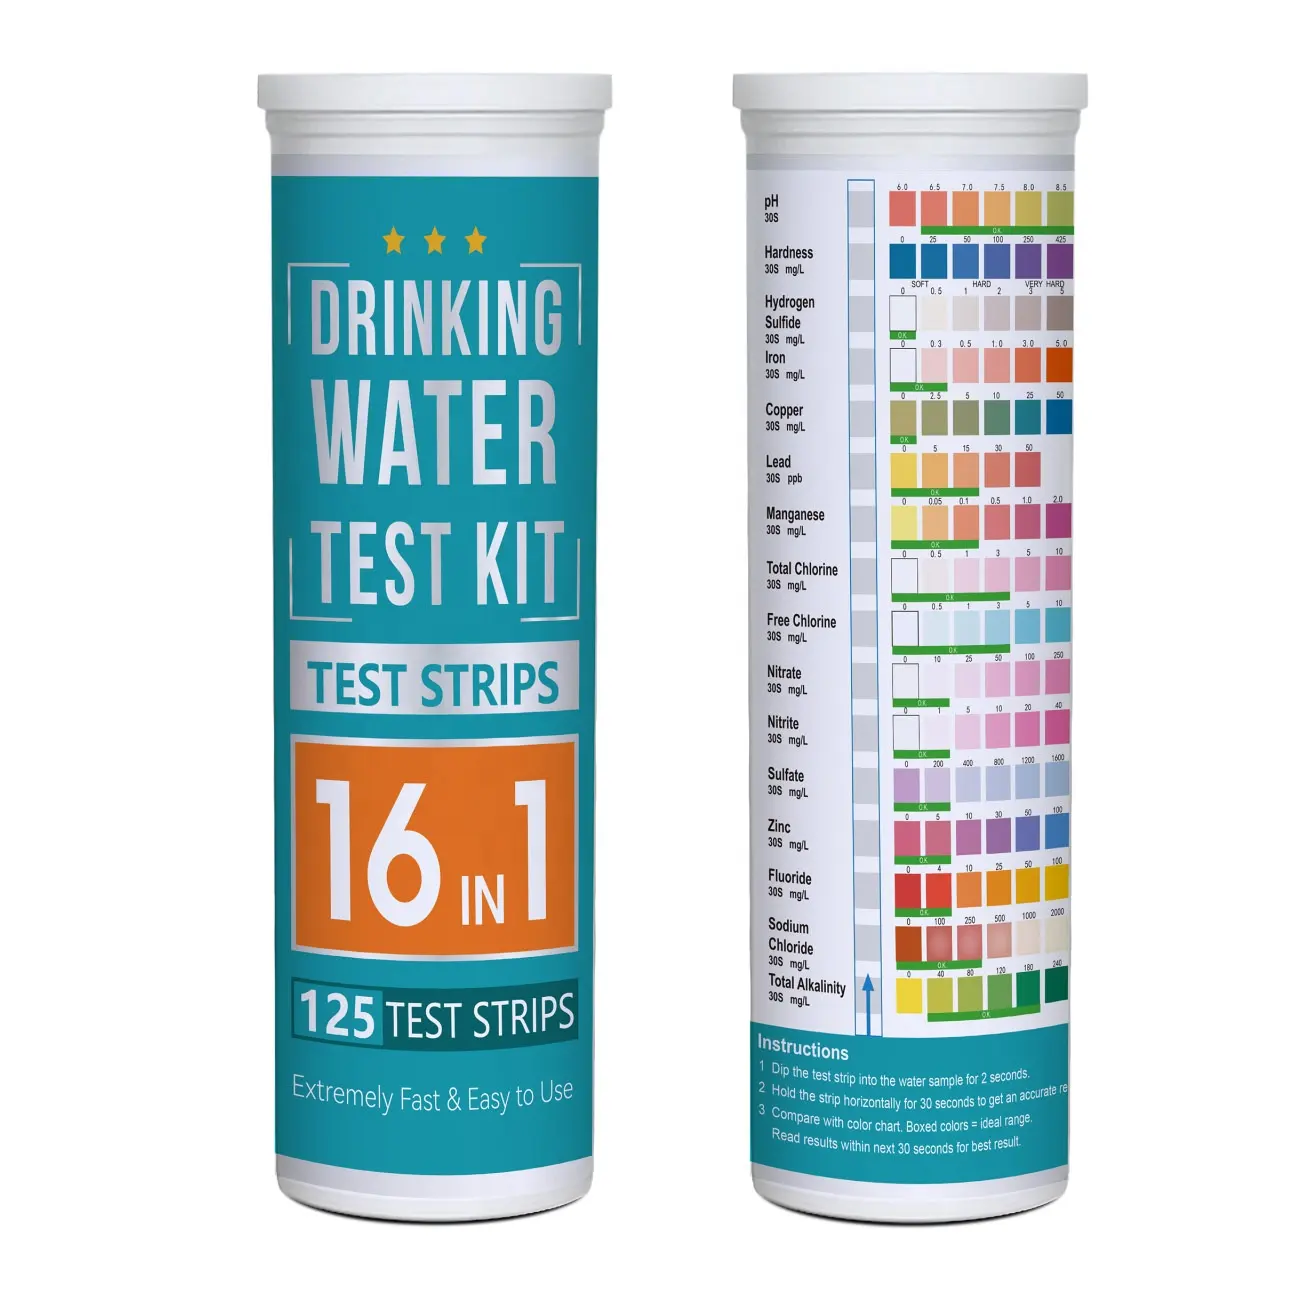 17 in 1 Drinking Water Testing Kit 100 Strips,Home Tap and Well Water Test Kit for Hardness, Lead, Iron, Copper, Chlorine